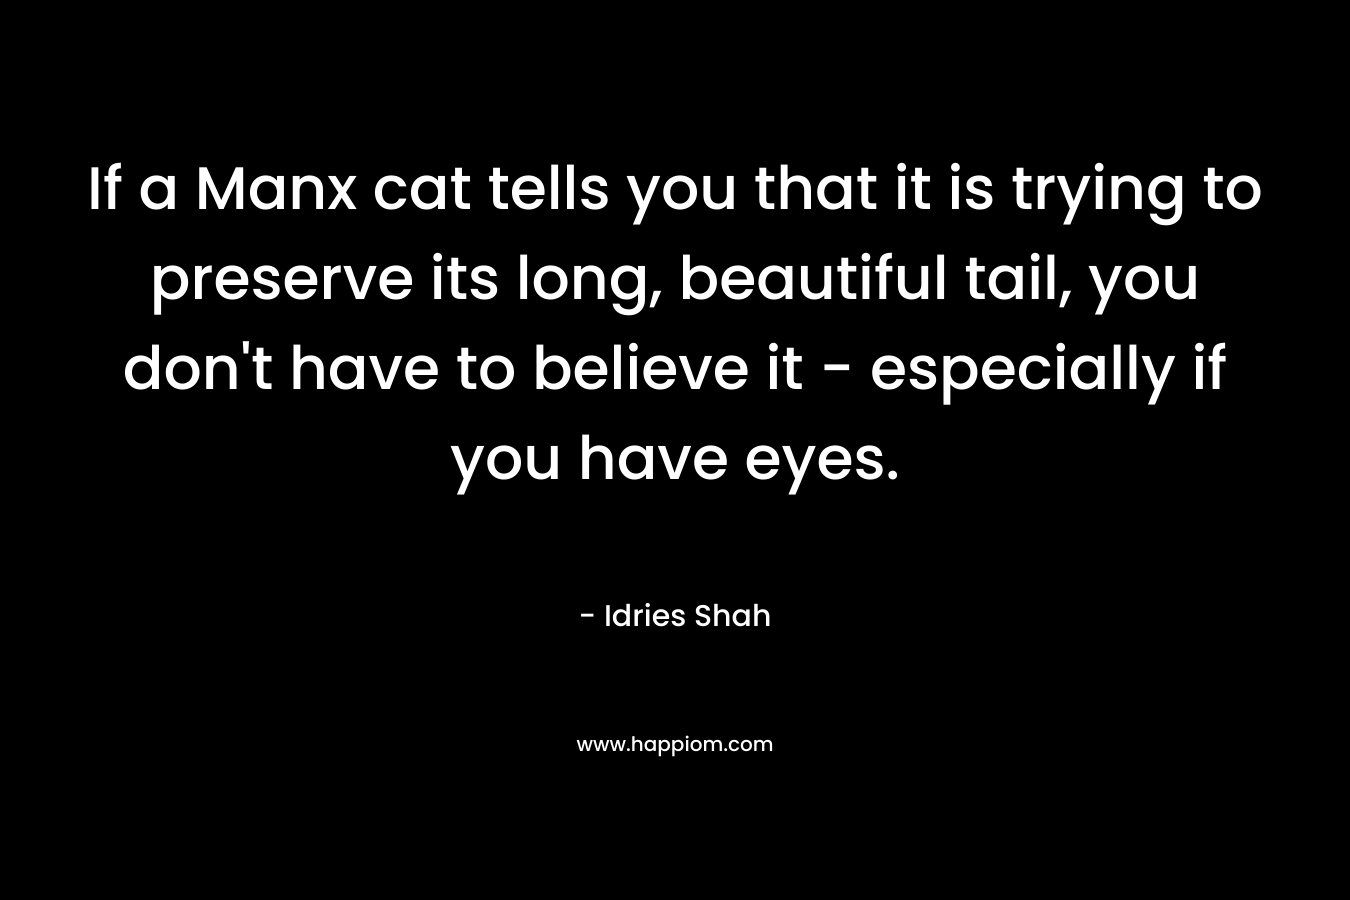 If a Manx cat tells you that it is trying to preserve its long, beautiful tail, you don’t have to believe it – especially if you have eyes. – Idries Shah